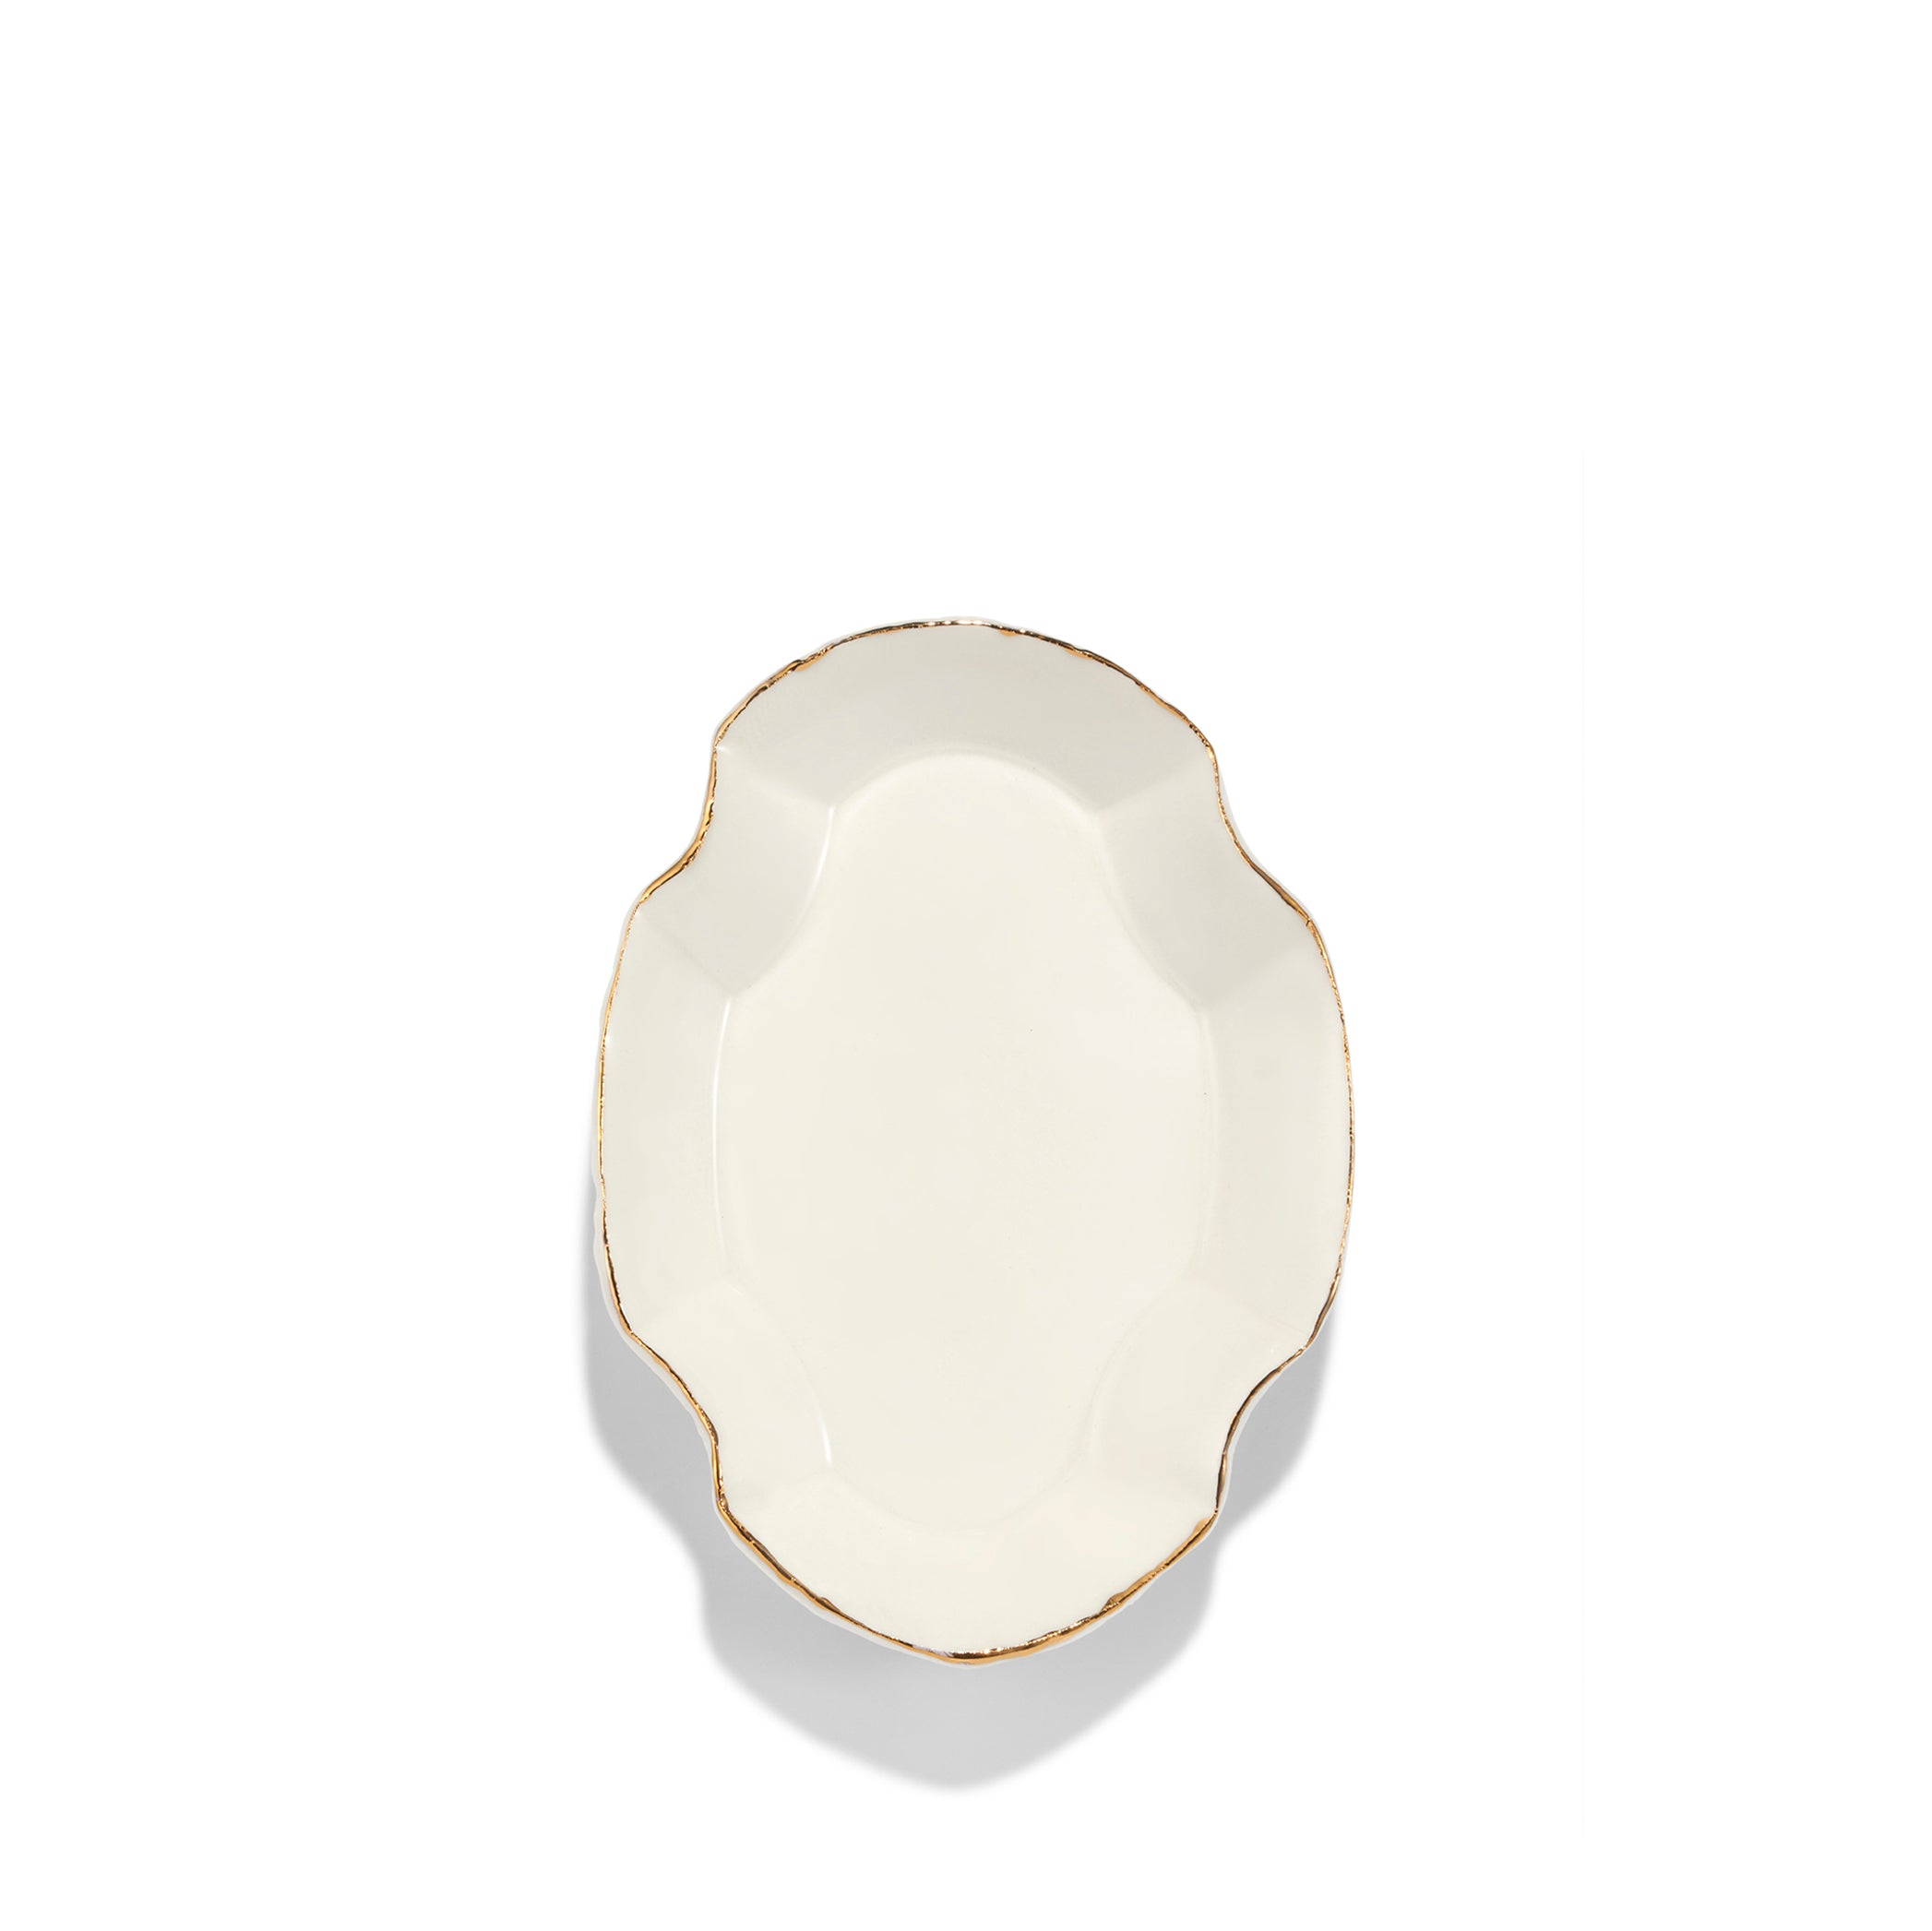 HB Deco Jagged Oval Tray, 15cm